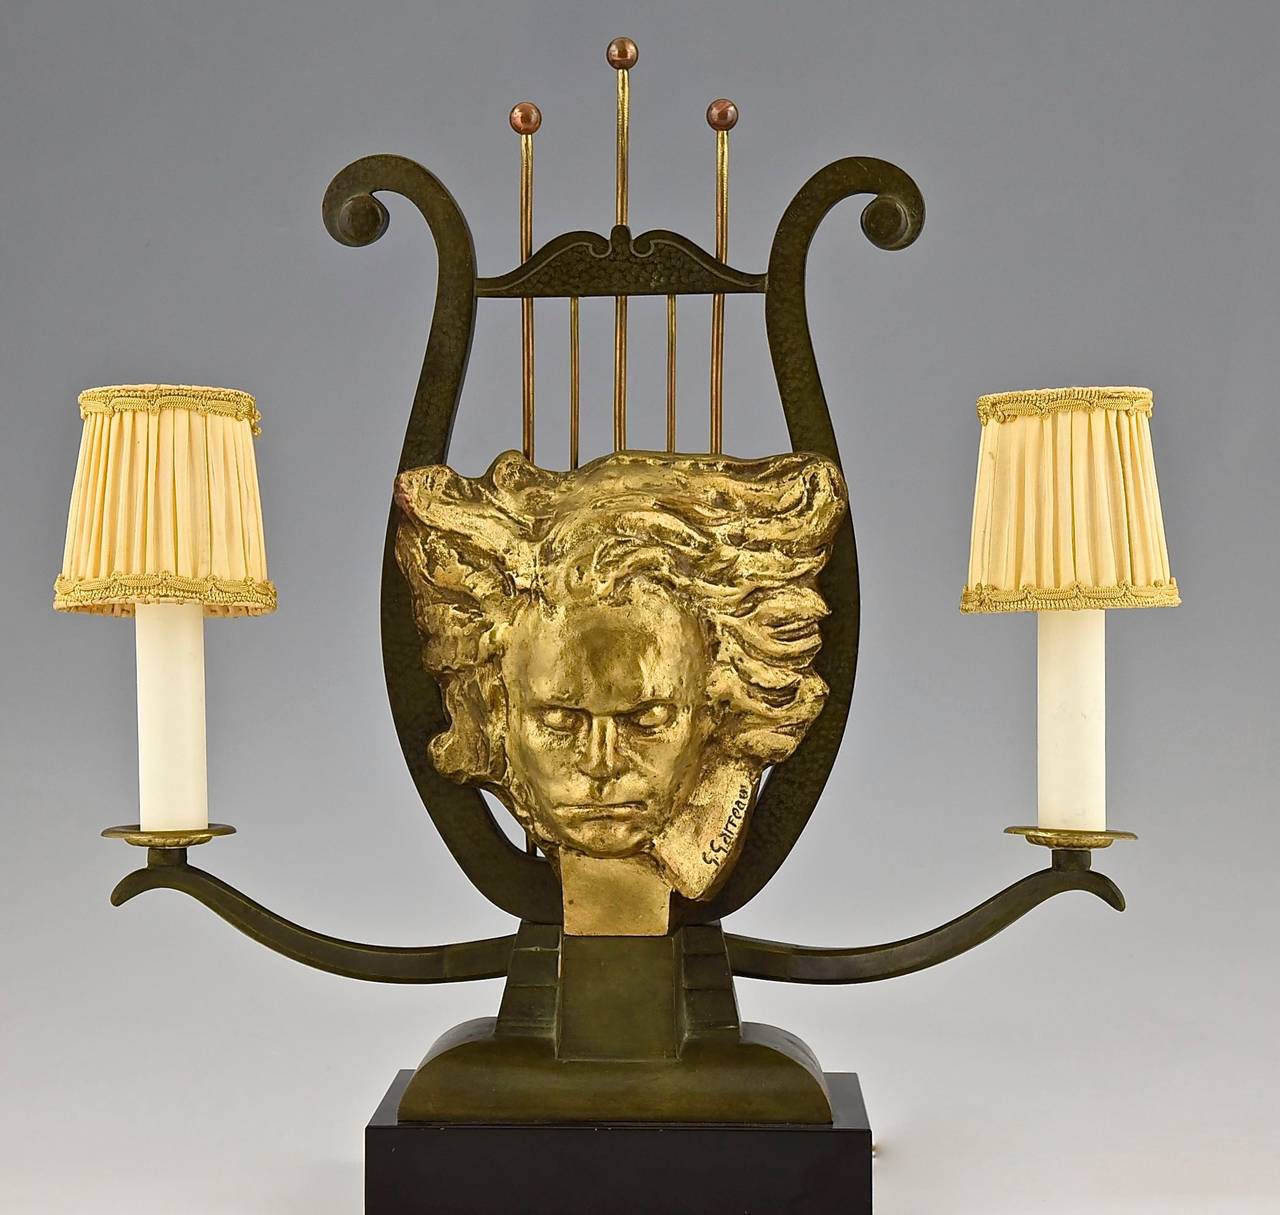 Art Deco bronze lamp with the head of Beethoven.
By Georges Raoul Garreau.
Style: Art Deco.
Condition: 
Good original condition. 
Rewired for European electricity.
An adapter plug will be provided.
Date: circa 1935.
Material: Bronze with